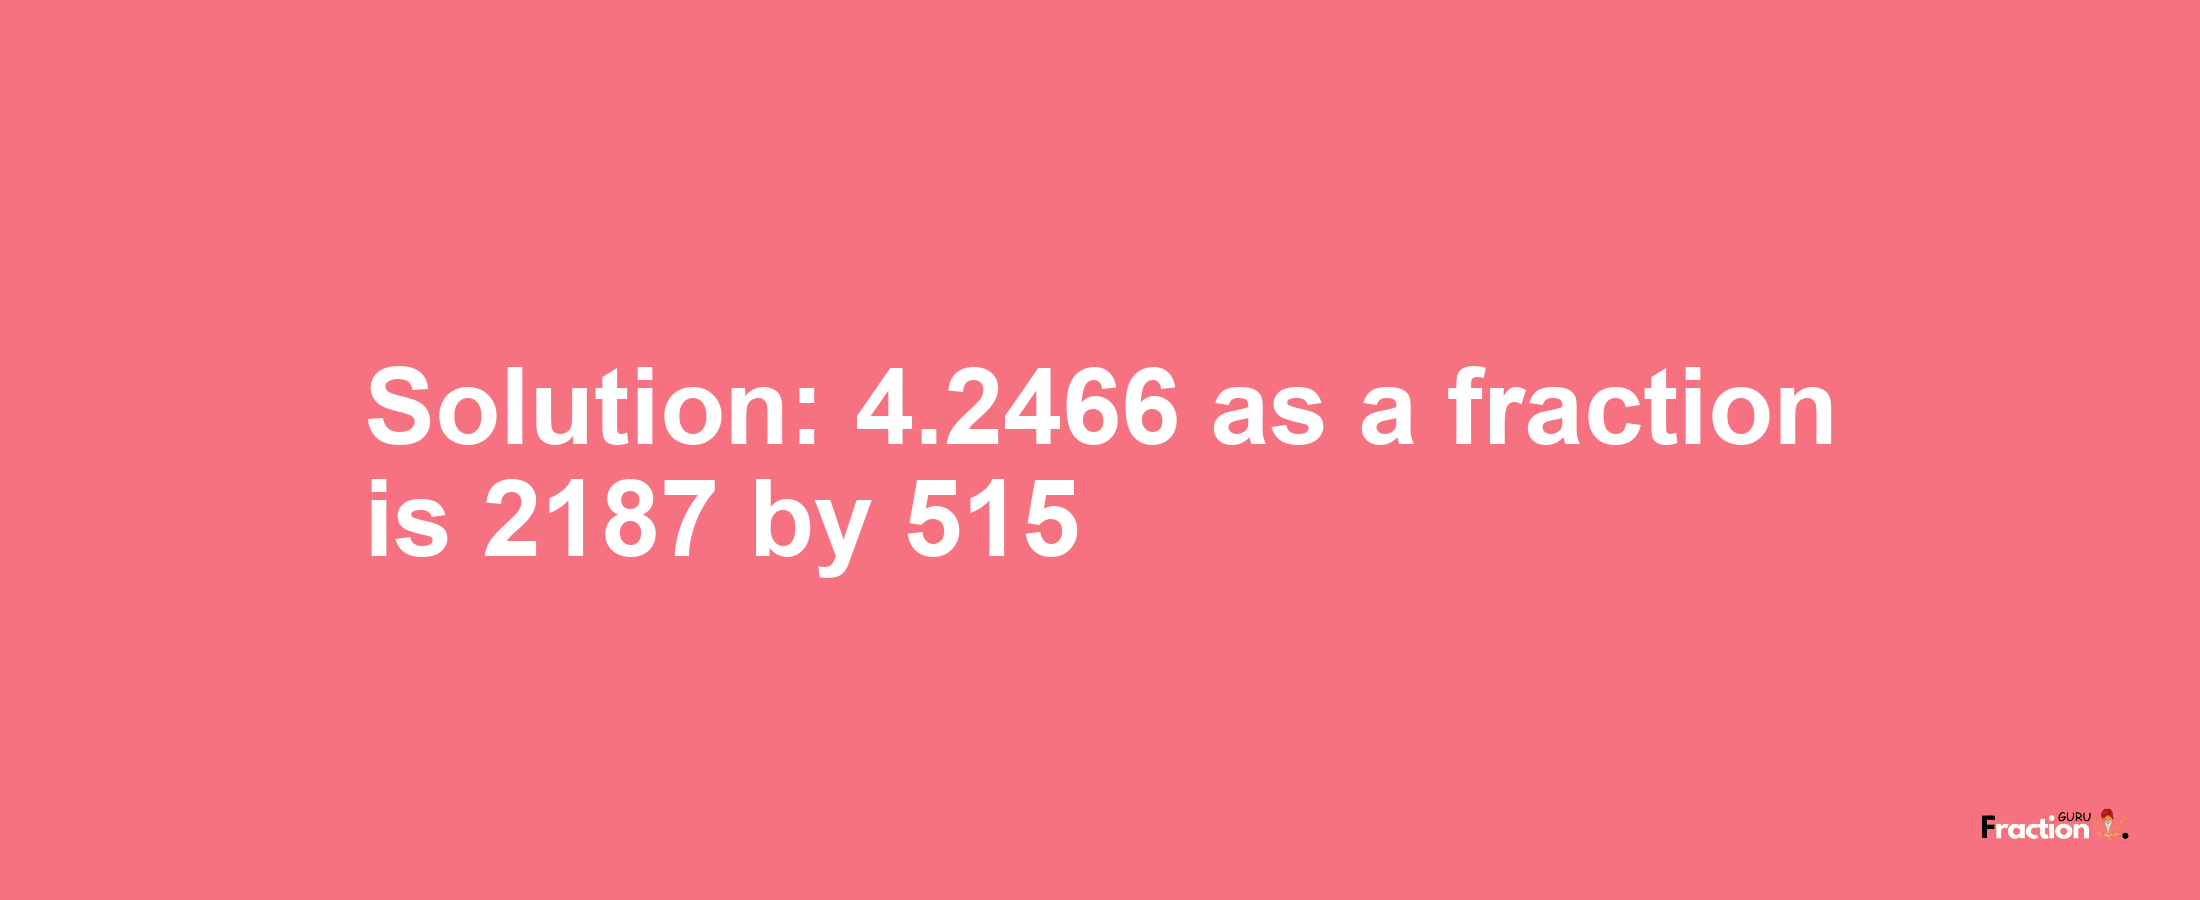 Solution:4.2466 as a fraction is 2187/515